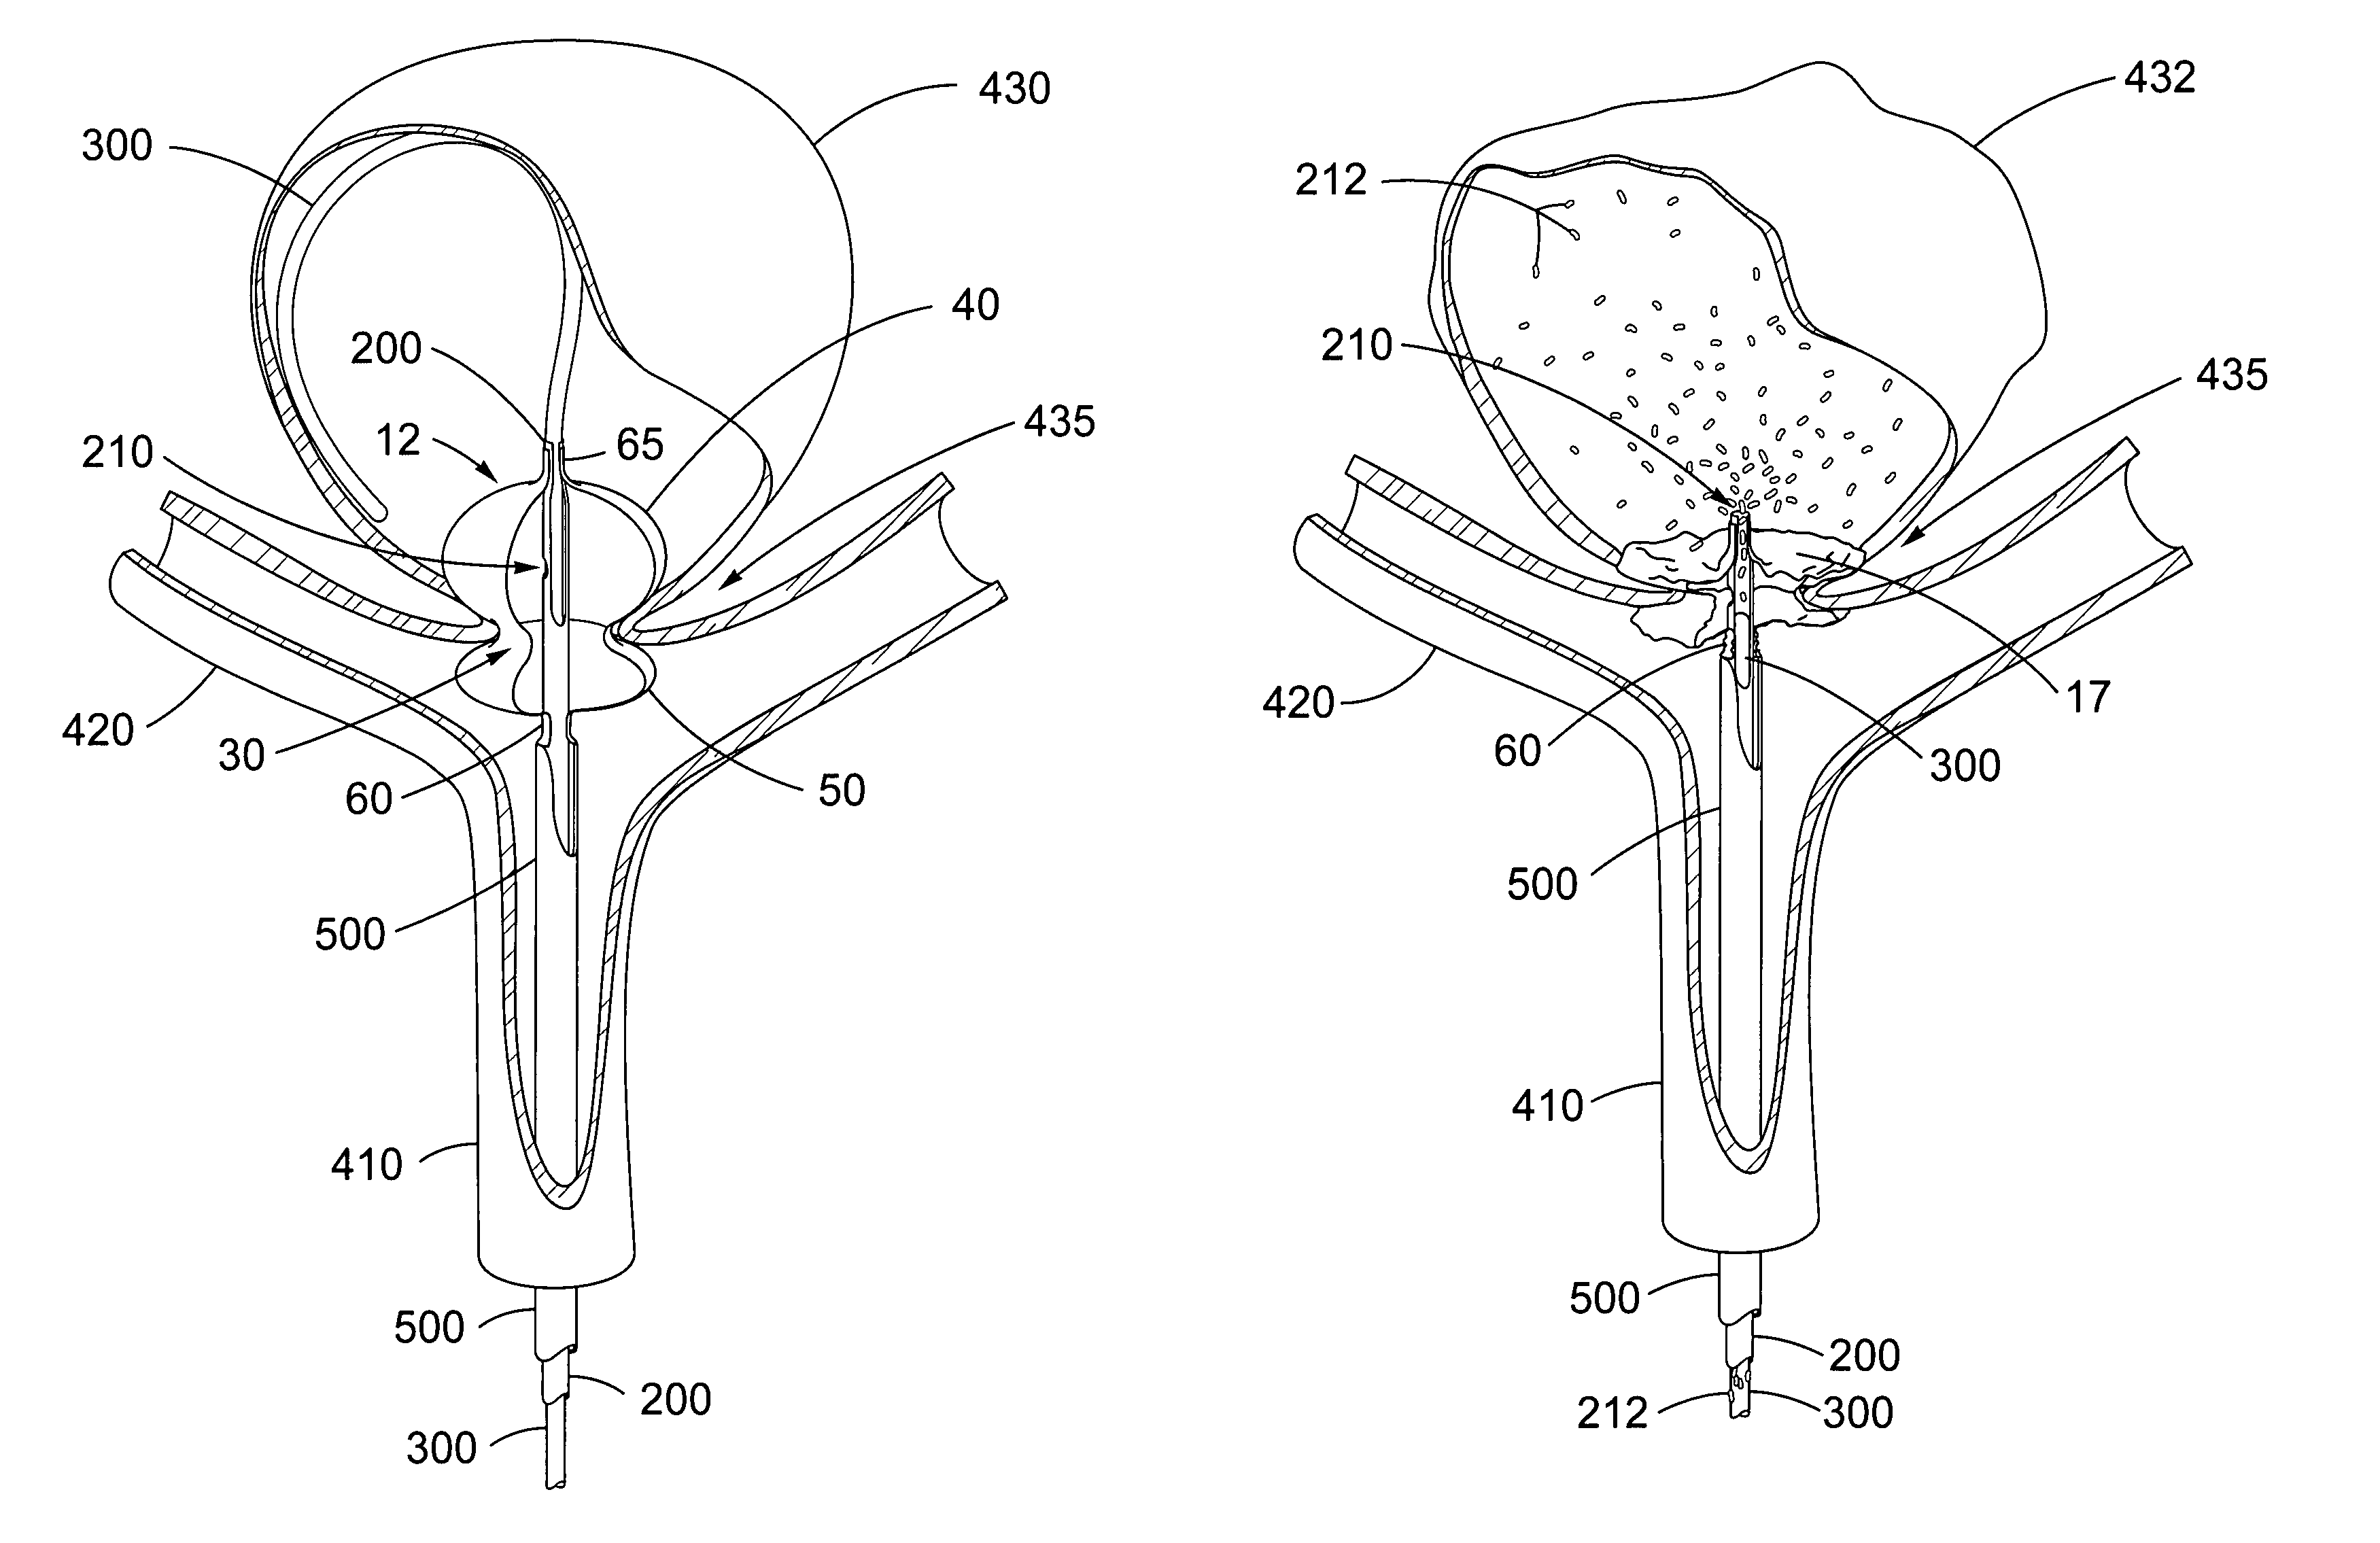 Over-the-wire exclusion device and system for delivery